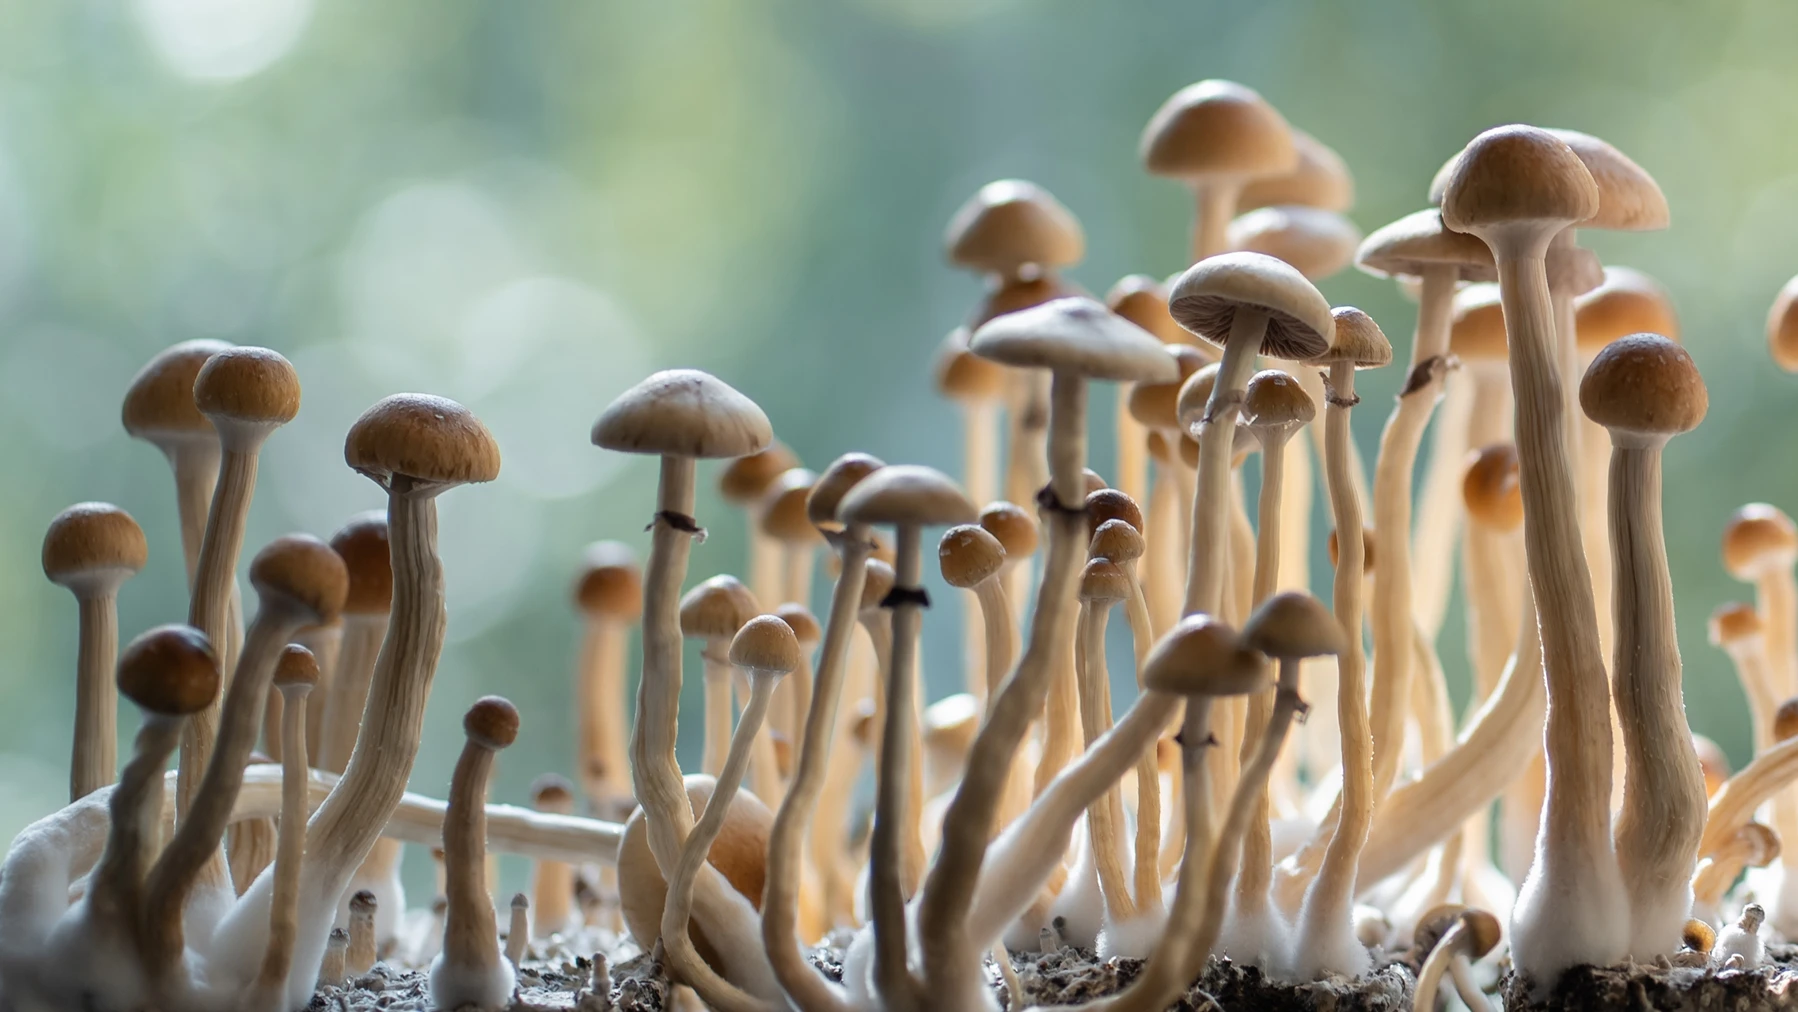 The legal status of psychedelics around the world